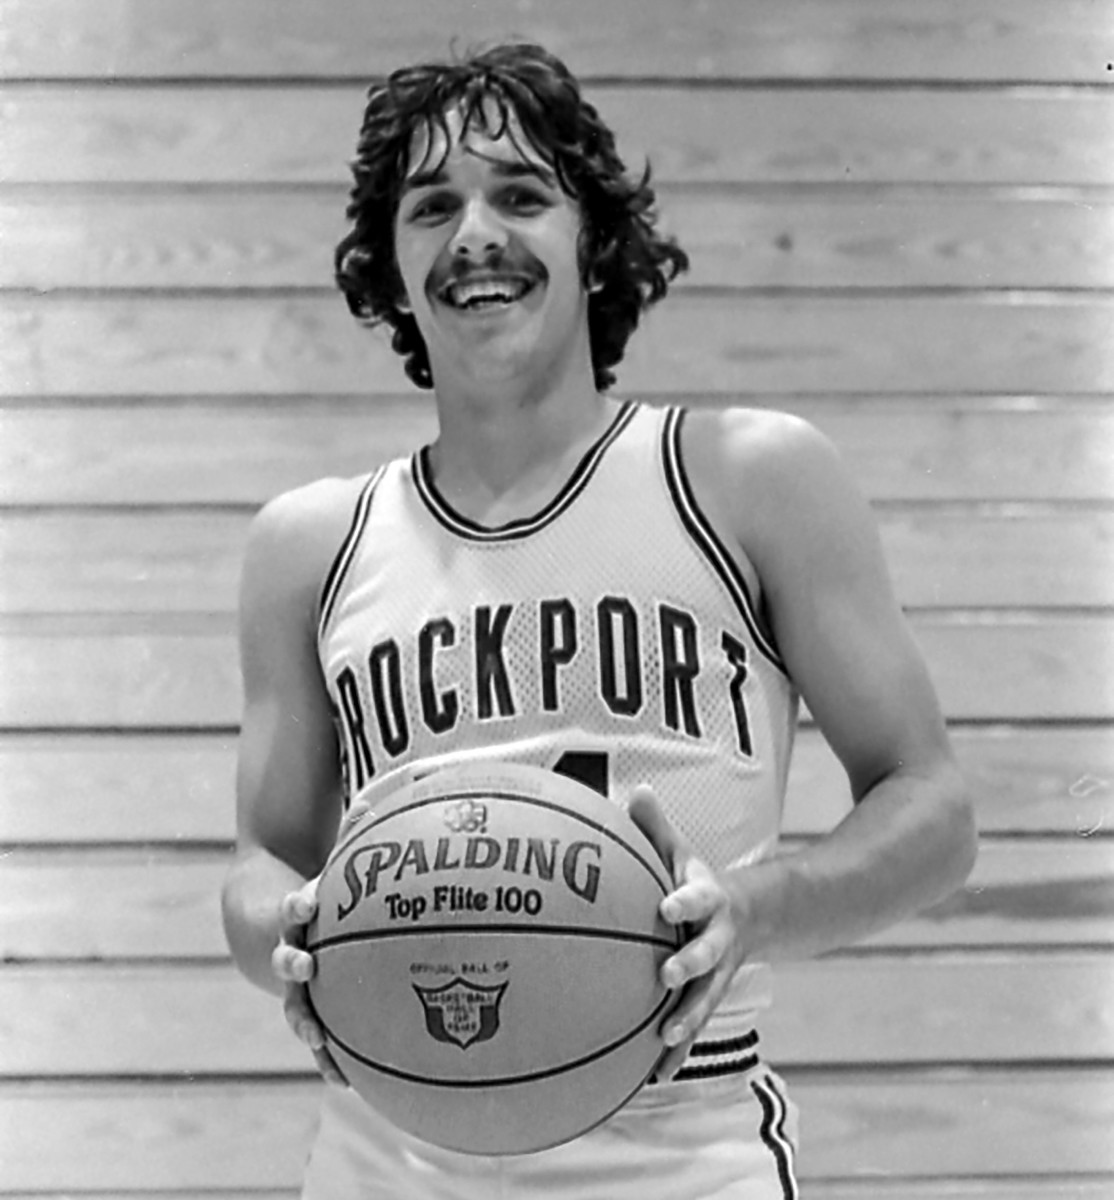 Stan’s mustache dates to his days as a Division III guard in 1980.